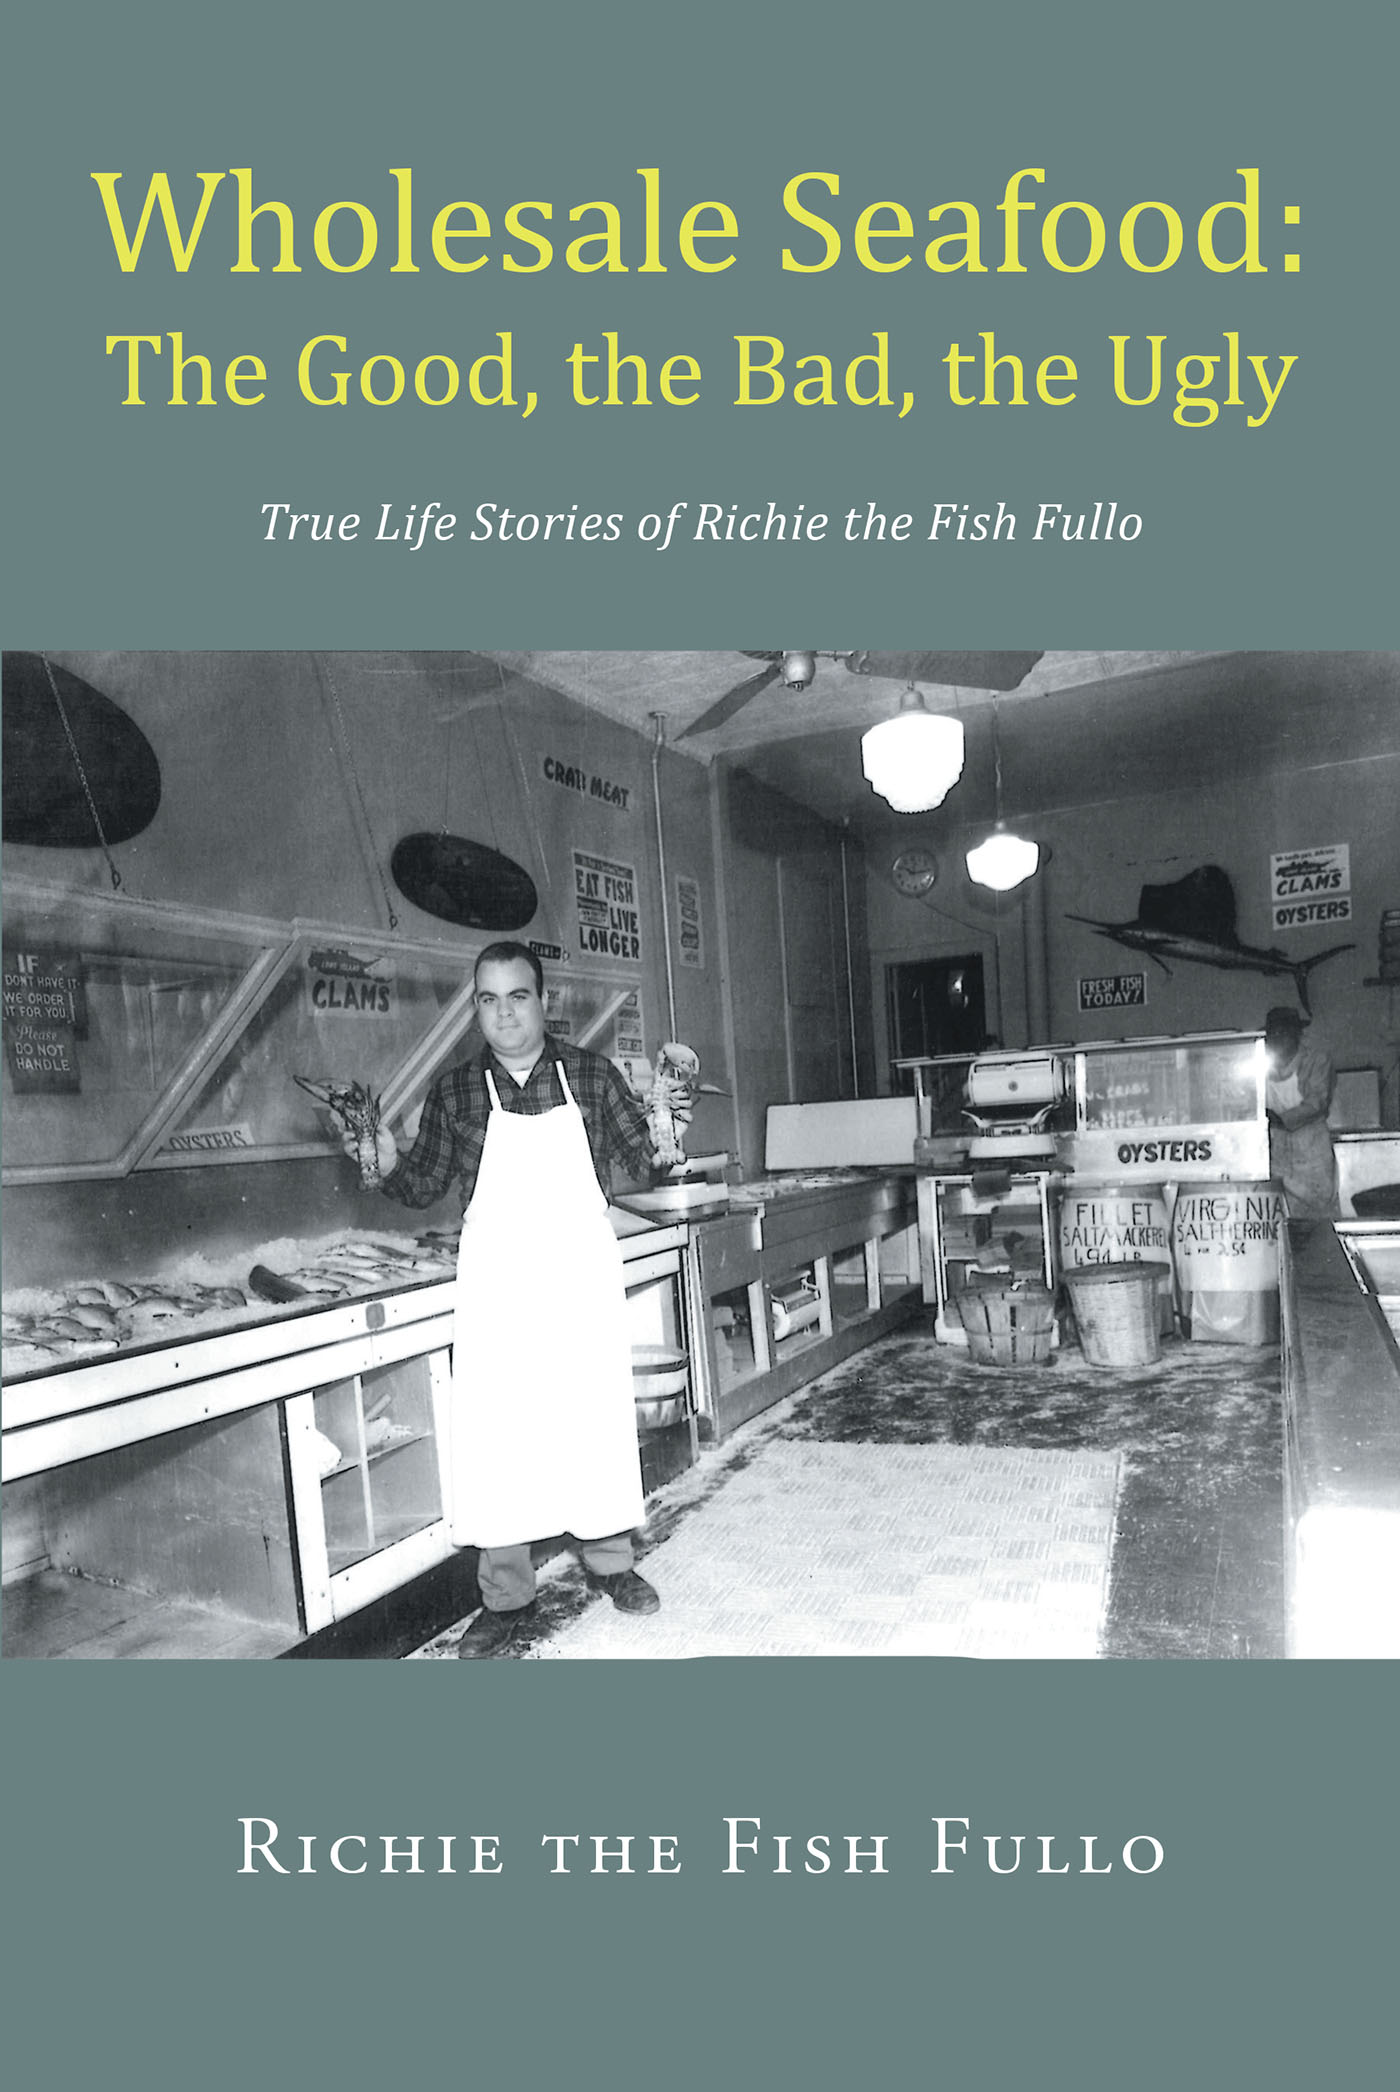 Author Richie the Fish Fullo’s New Book, “Wholesale Seafood: The Good, the Bad, the Ugly,” is a Poignant Memoir Revealing the Highs and Lows of the Life of a Fishmonger